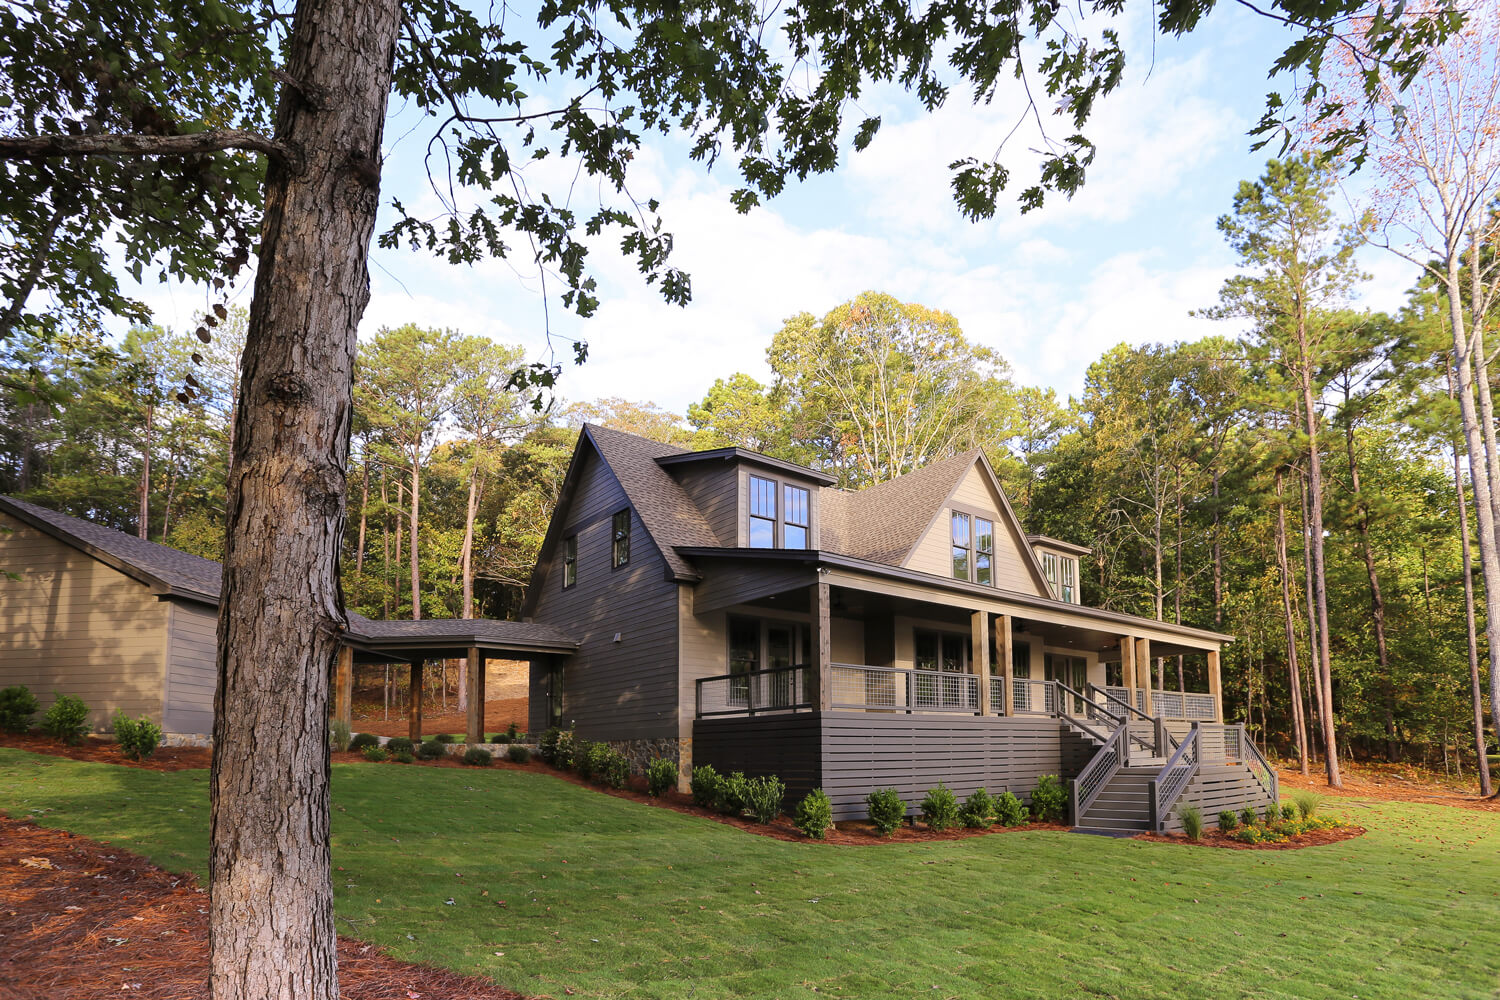 Lake House - Front Elevation - Designed by Foshee Architecture